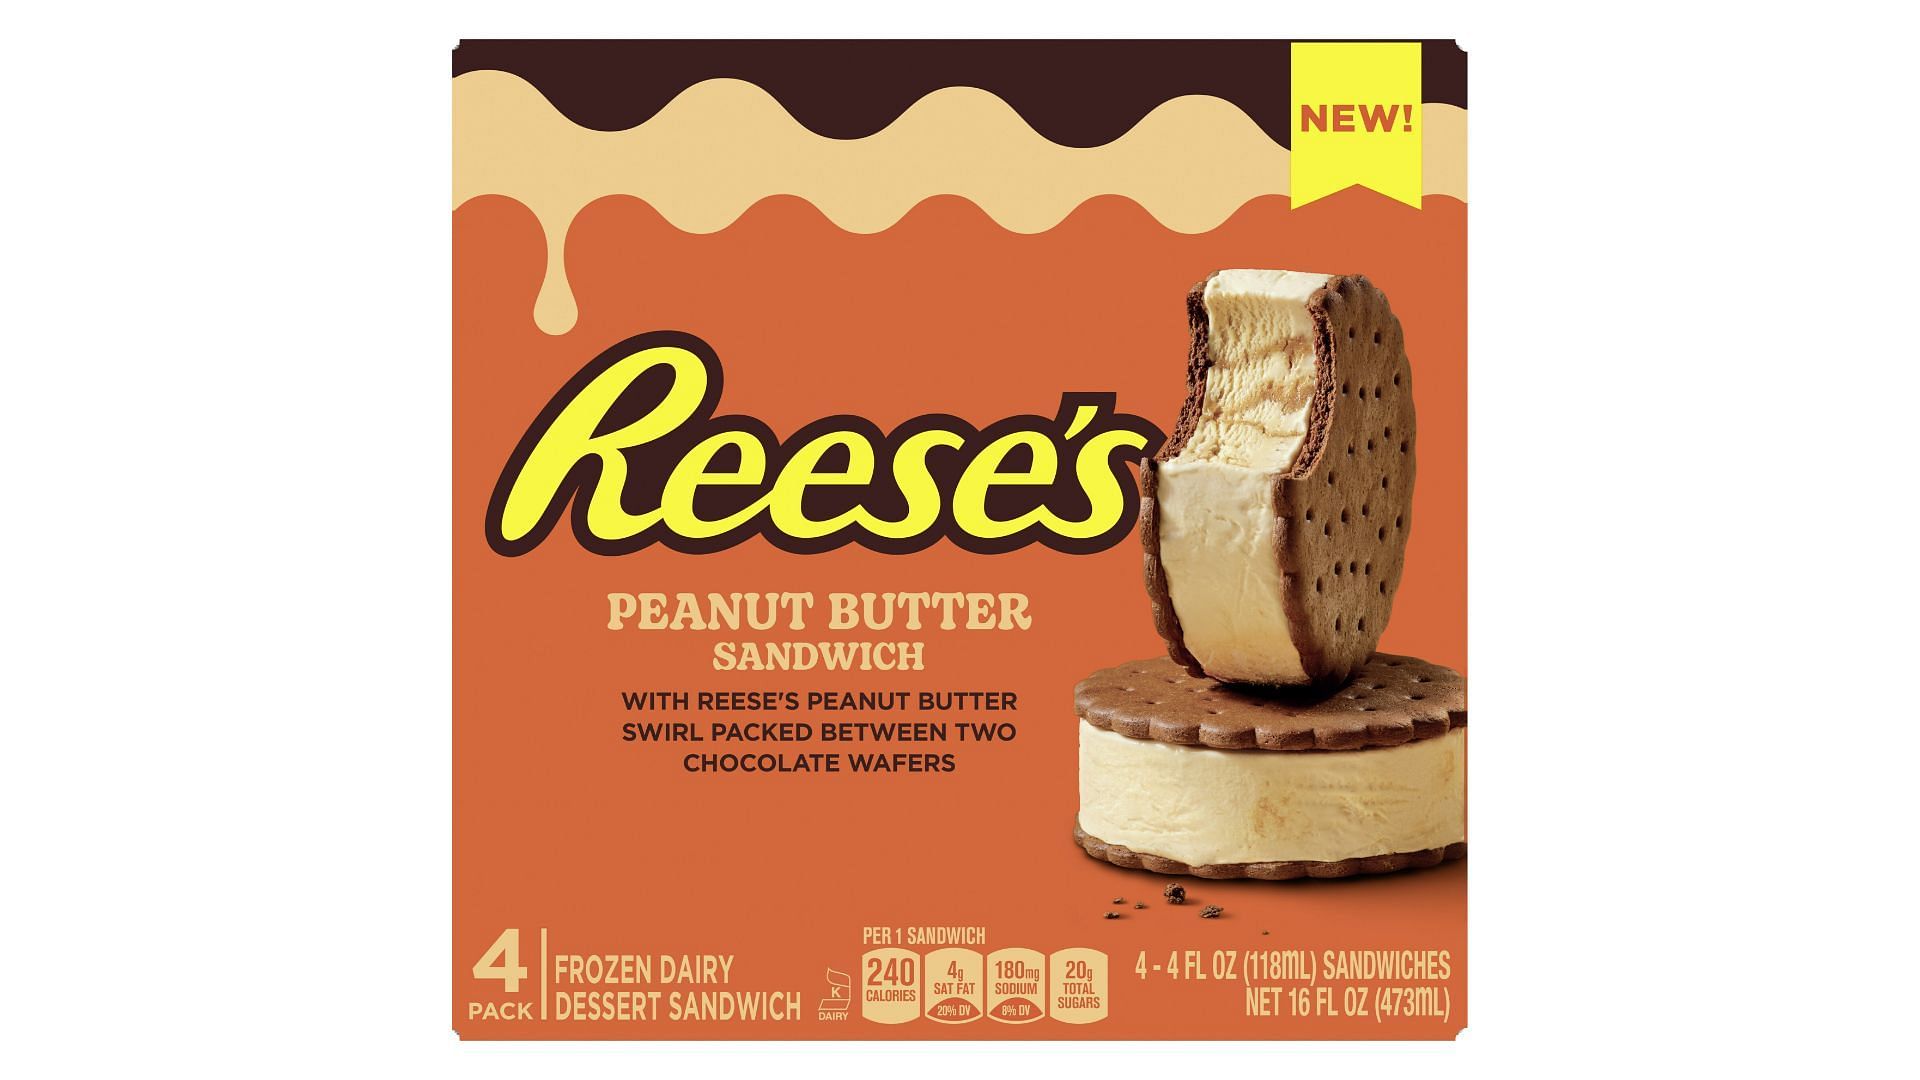 The 4-pack Peanut Butter Sandwich features penut butter cup ice cream sandwiched between chocolate wafers (Image via Unilever Ice Creams)